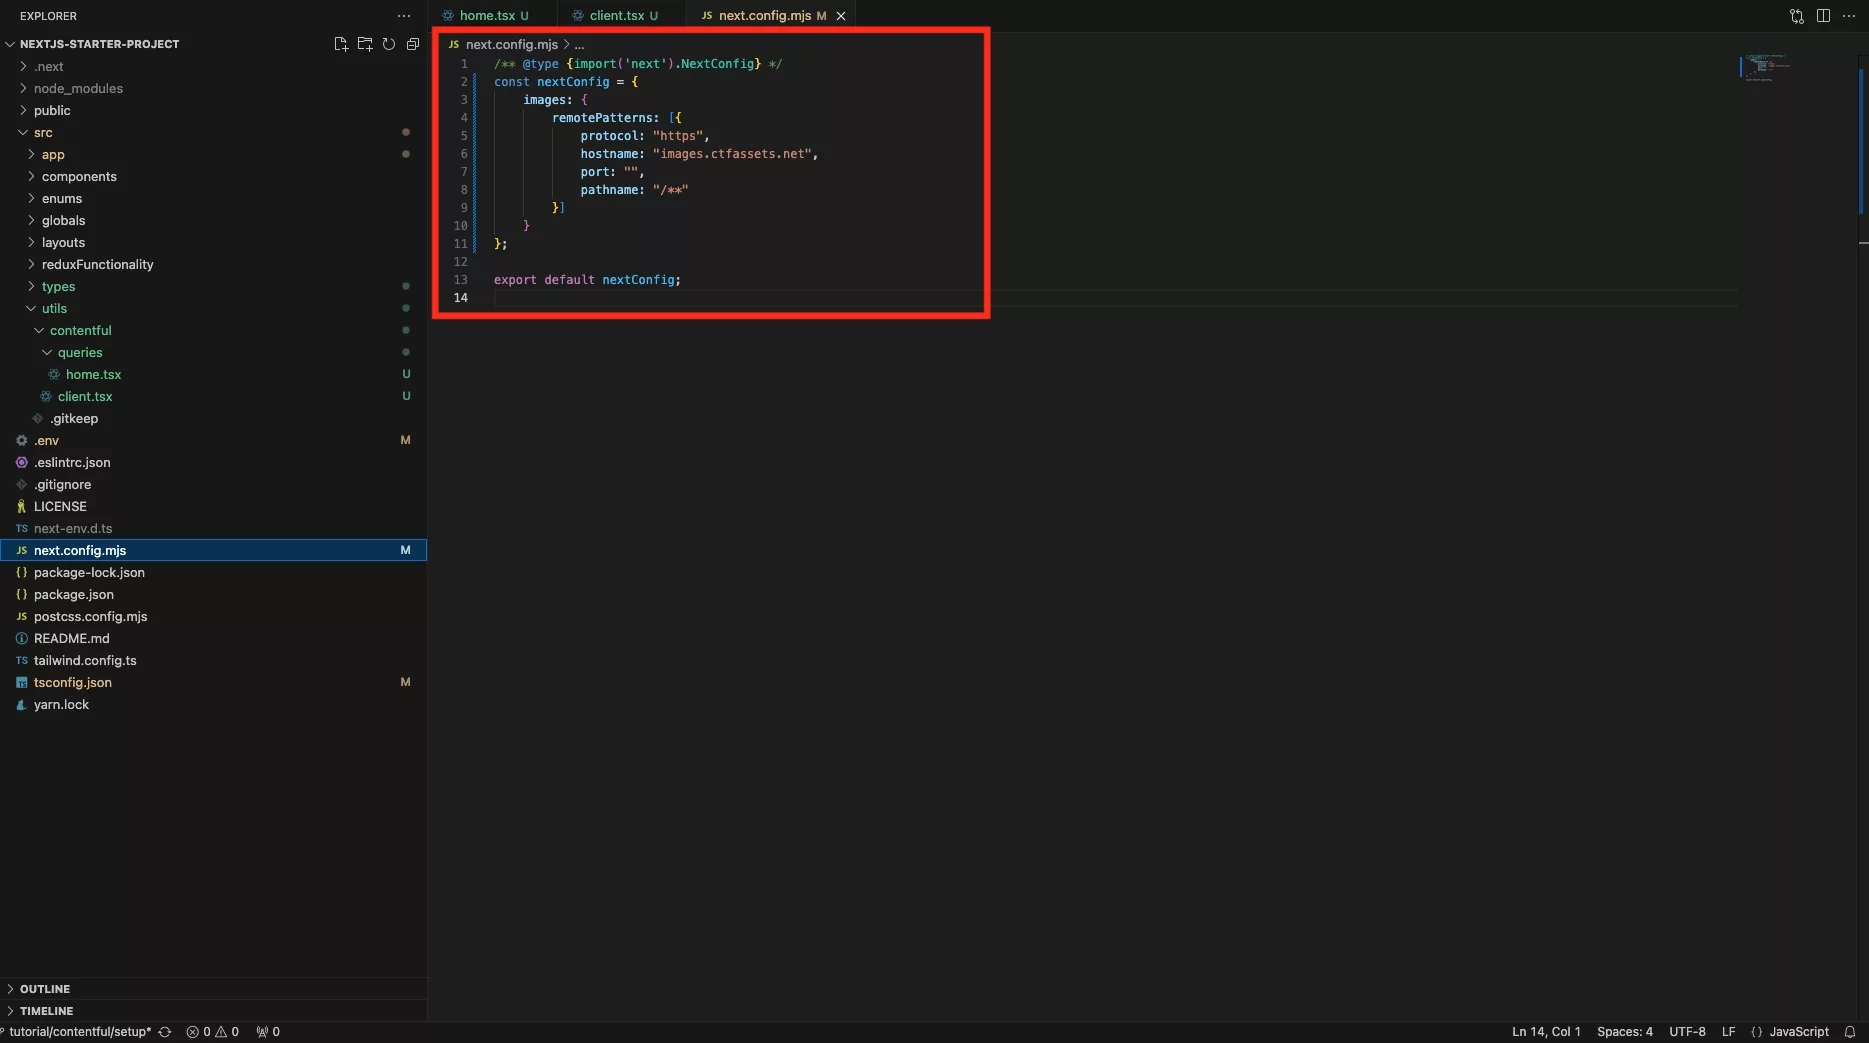 A screenshot of VSCode showing the updated next.config.mjs file.